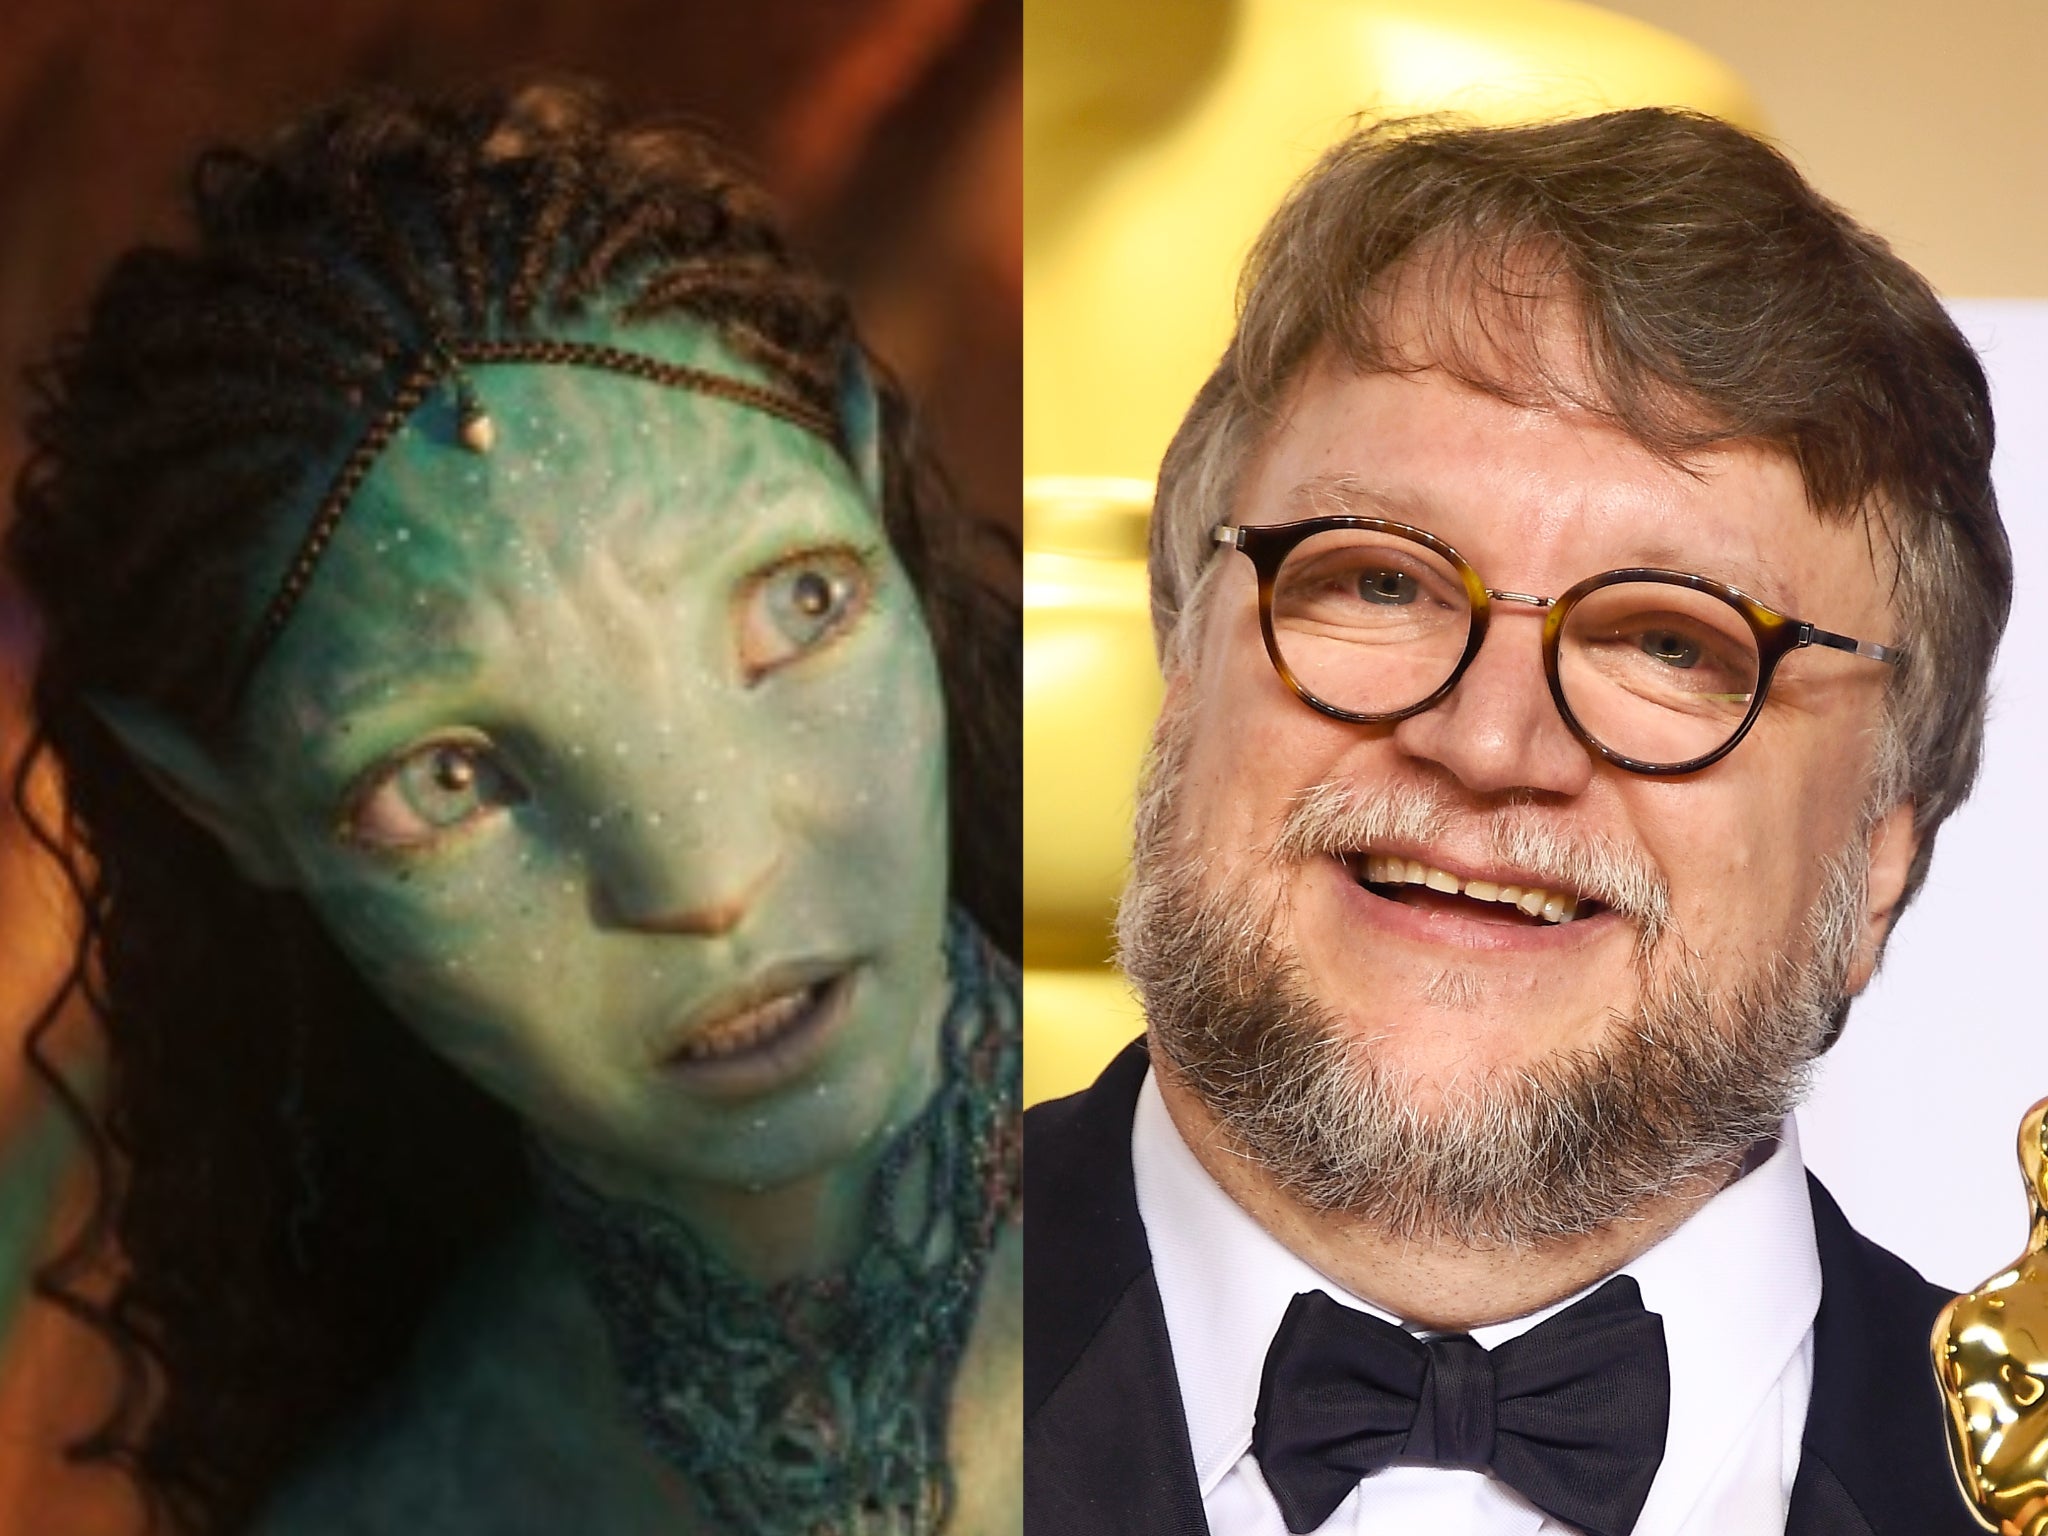 Avatar Way Of Waters First Review Is Out Guillermo del Toro Calls It A  Staggering Achievement  Entertainment